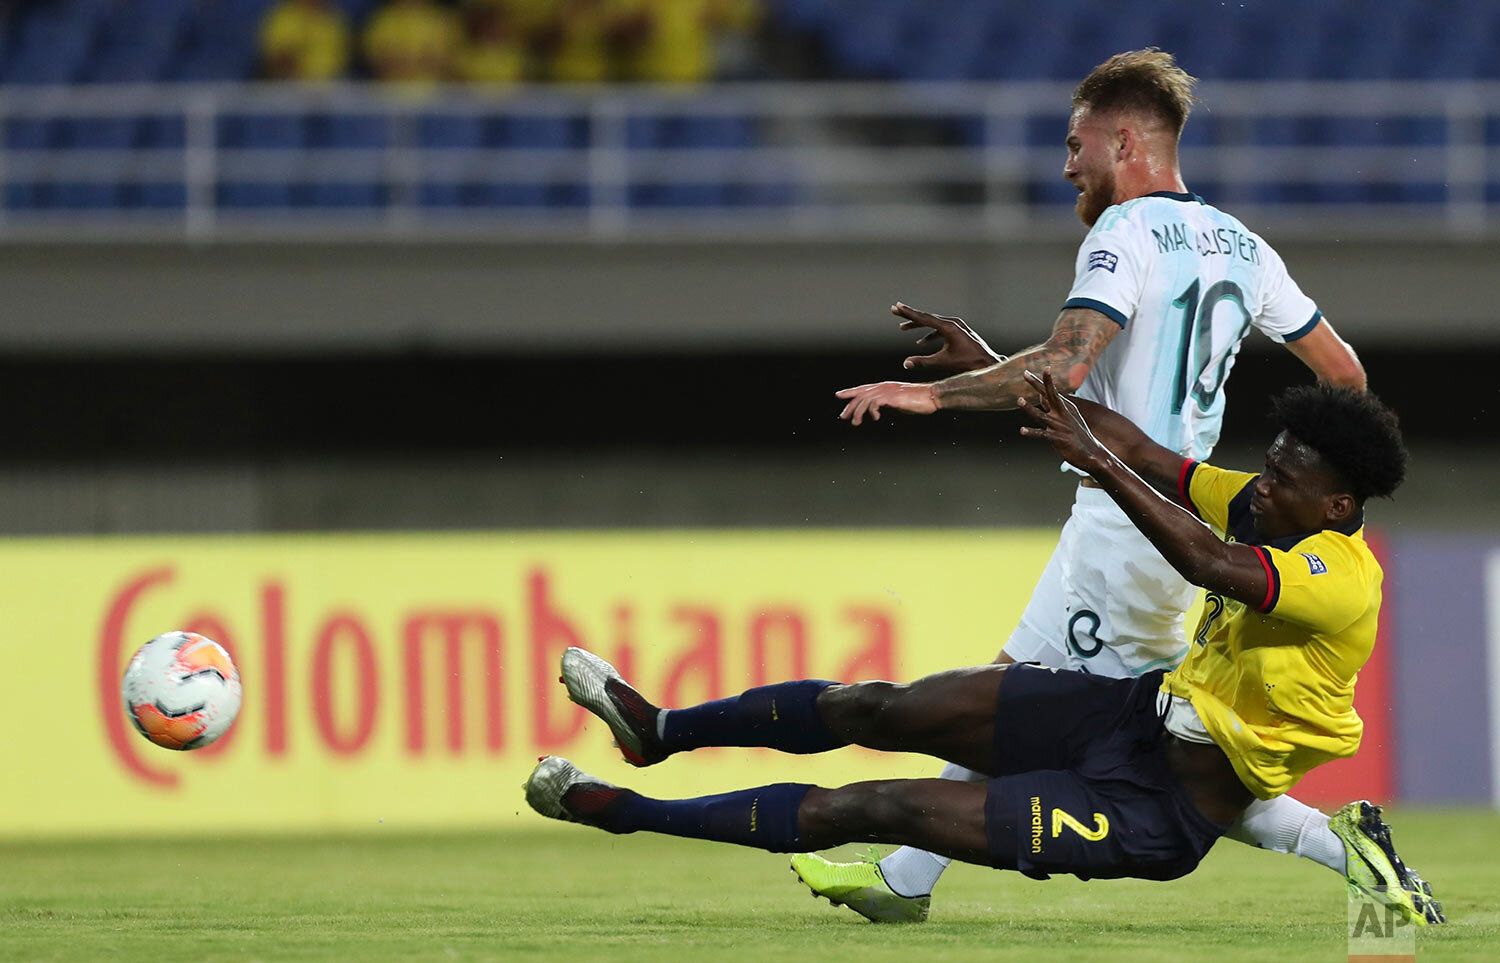  Argentina's Alexis Mac Allister, top, fights for the ball with Ecuador's Jackson Porozo during a South America Olympic qualifying U23 soccer match at the Hernan Ramirez Villegas stadium in Pereira, Colombia, Monday, Jan. 27, 2020. (AP Photo/Fernando